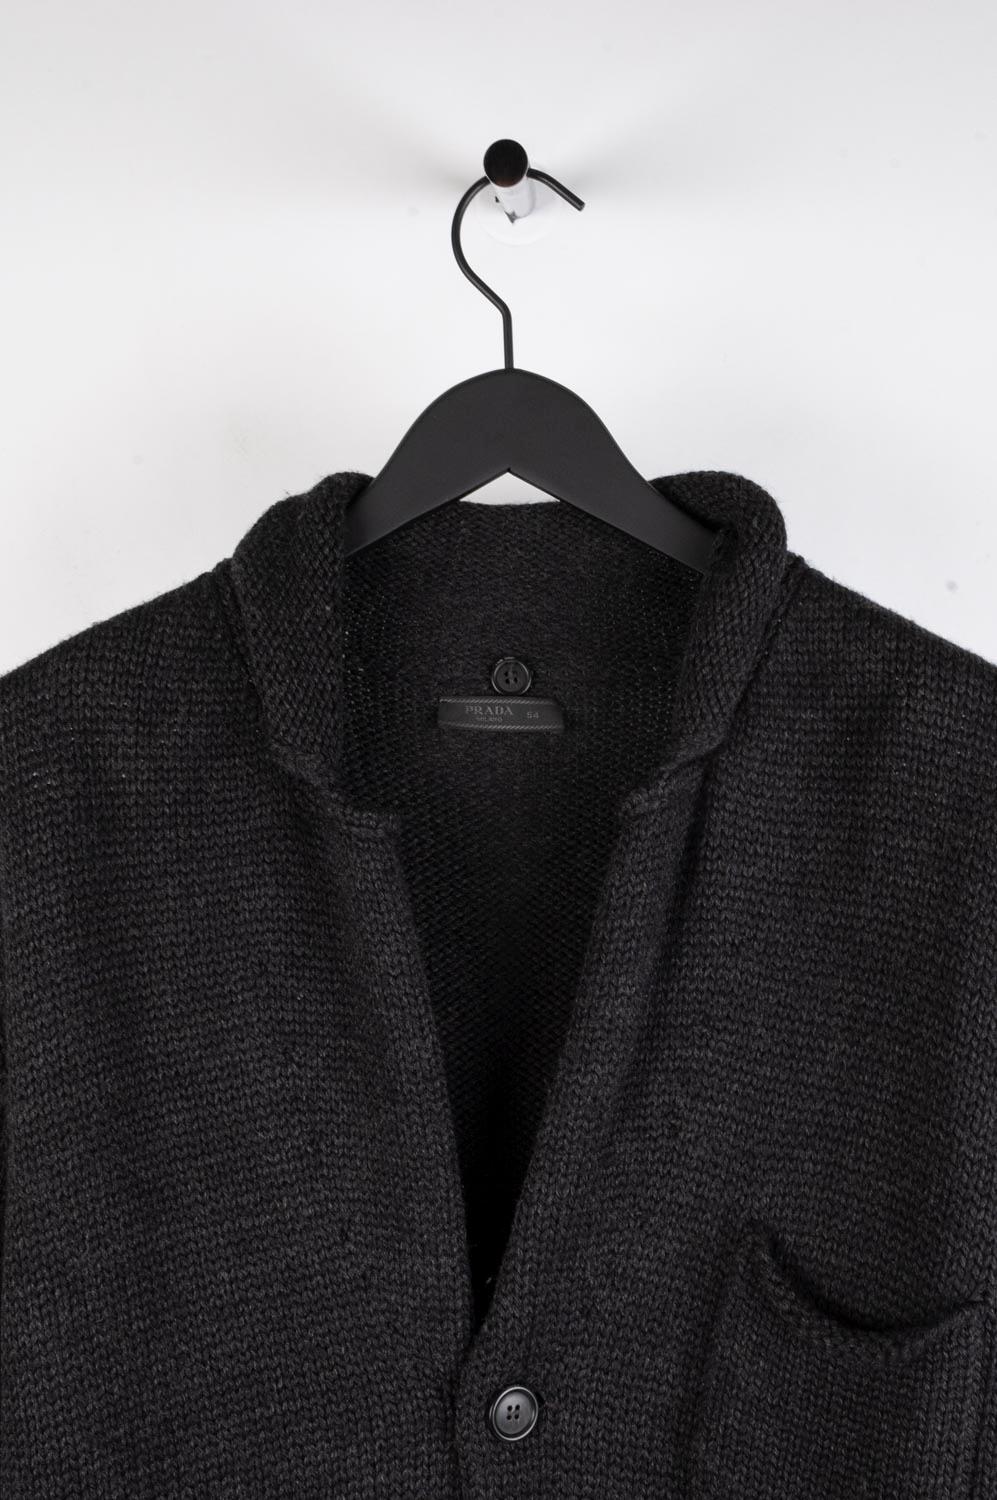 Item for sale is 100% genuine Prada Cardigan Men Sweater, S513
Color: Dark Grey
(An actual color may a bit vary due to individual computer screen interpretation)
Material: No care tag. Seems wool
Tag size: ITA54 (runs Large) 
This sweater is great